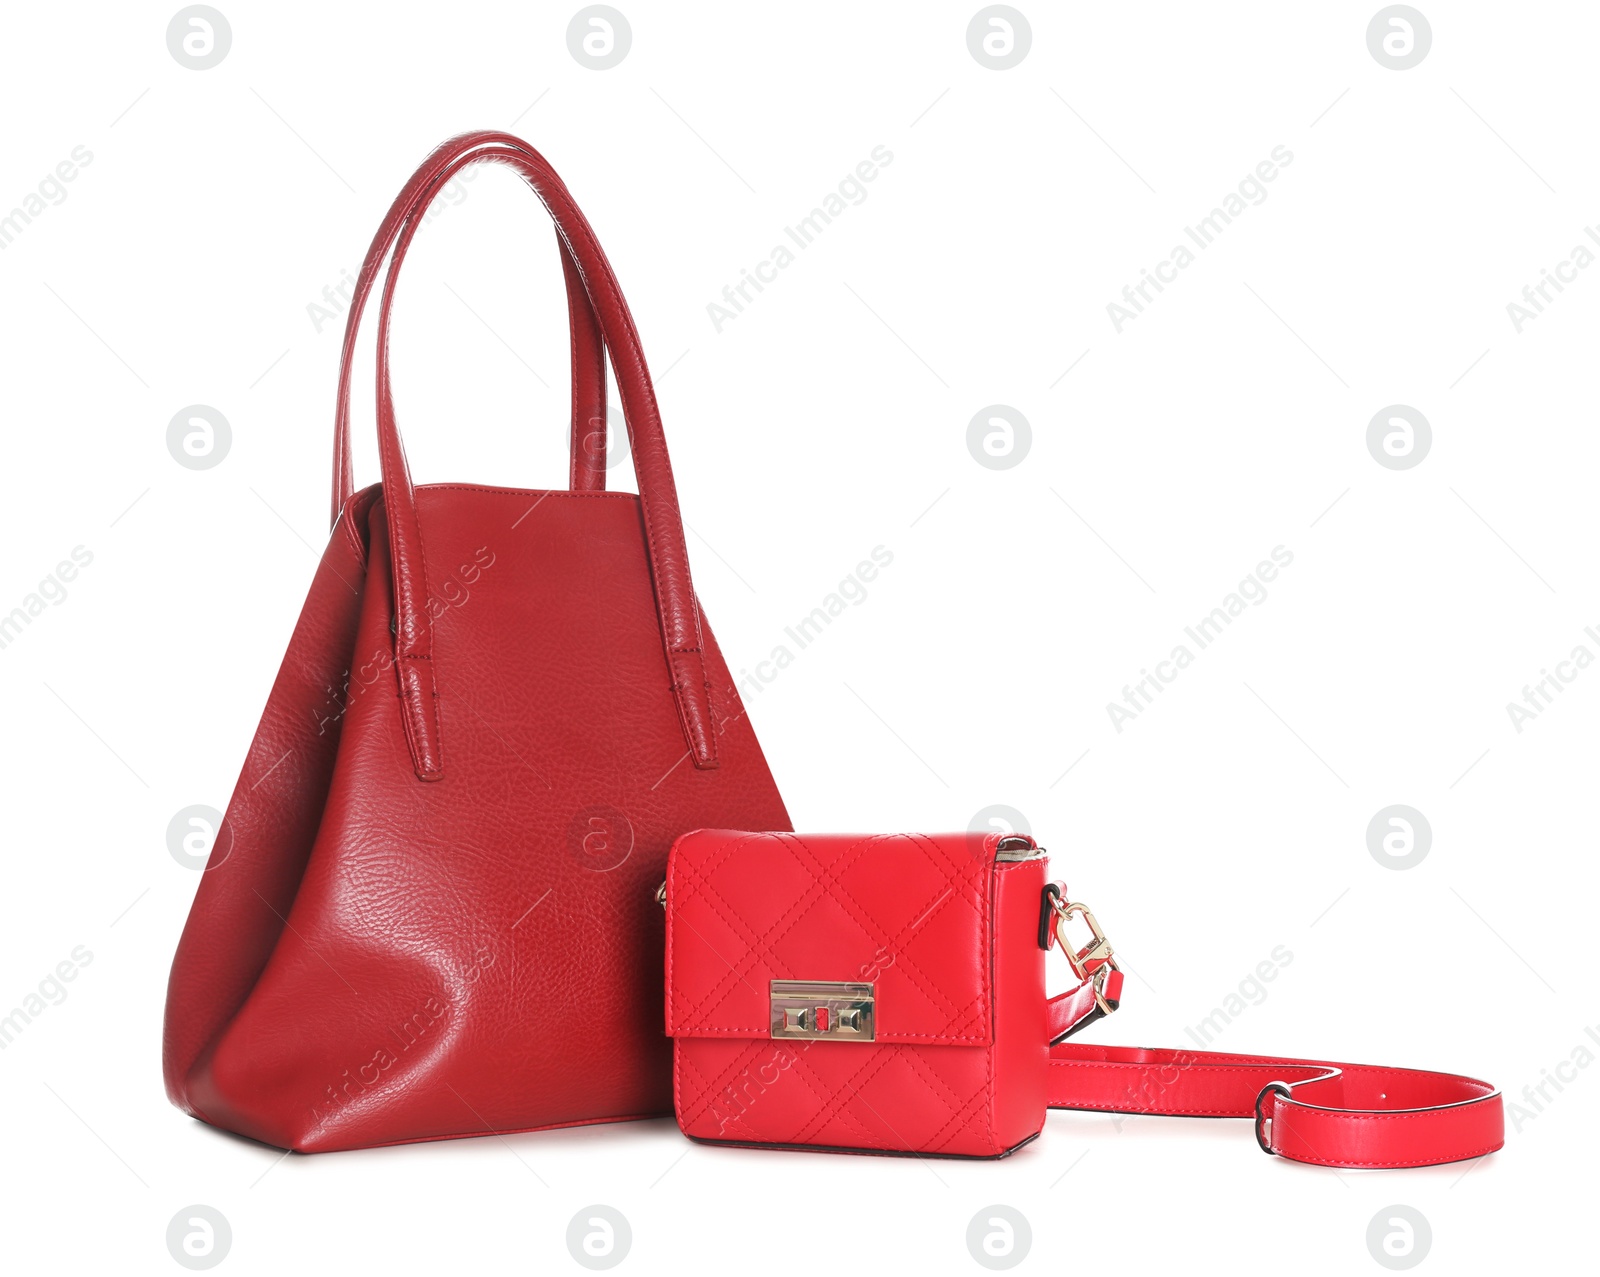 Photo of Different stylish woman's bags isolated on white